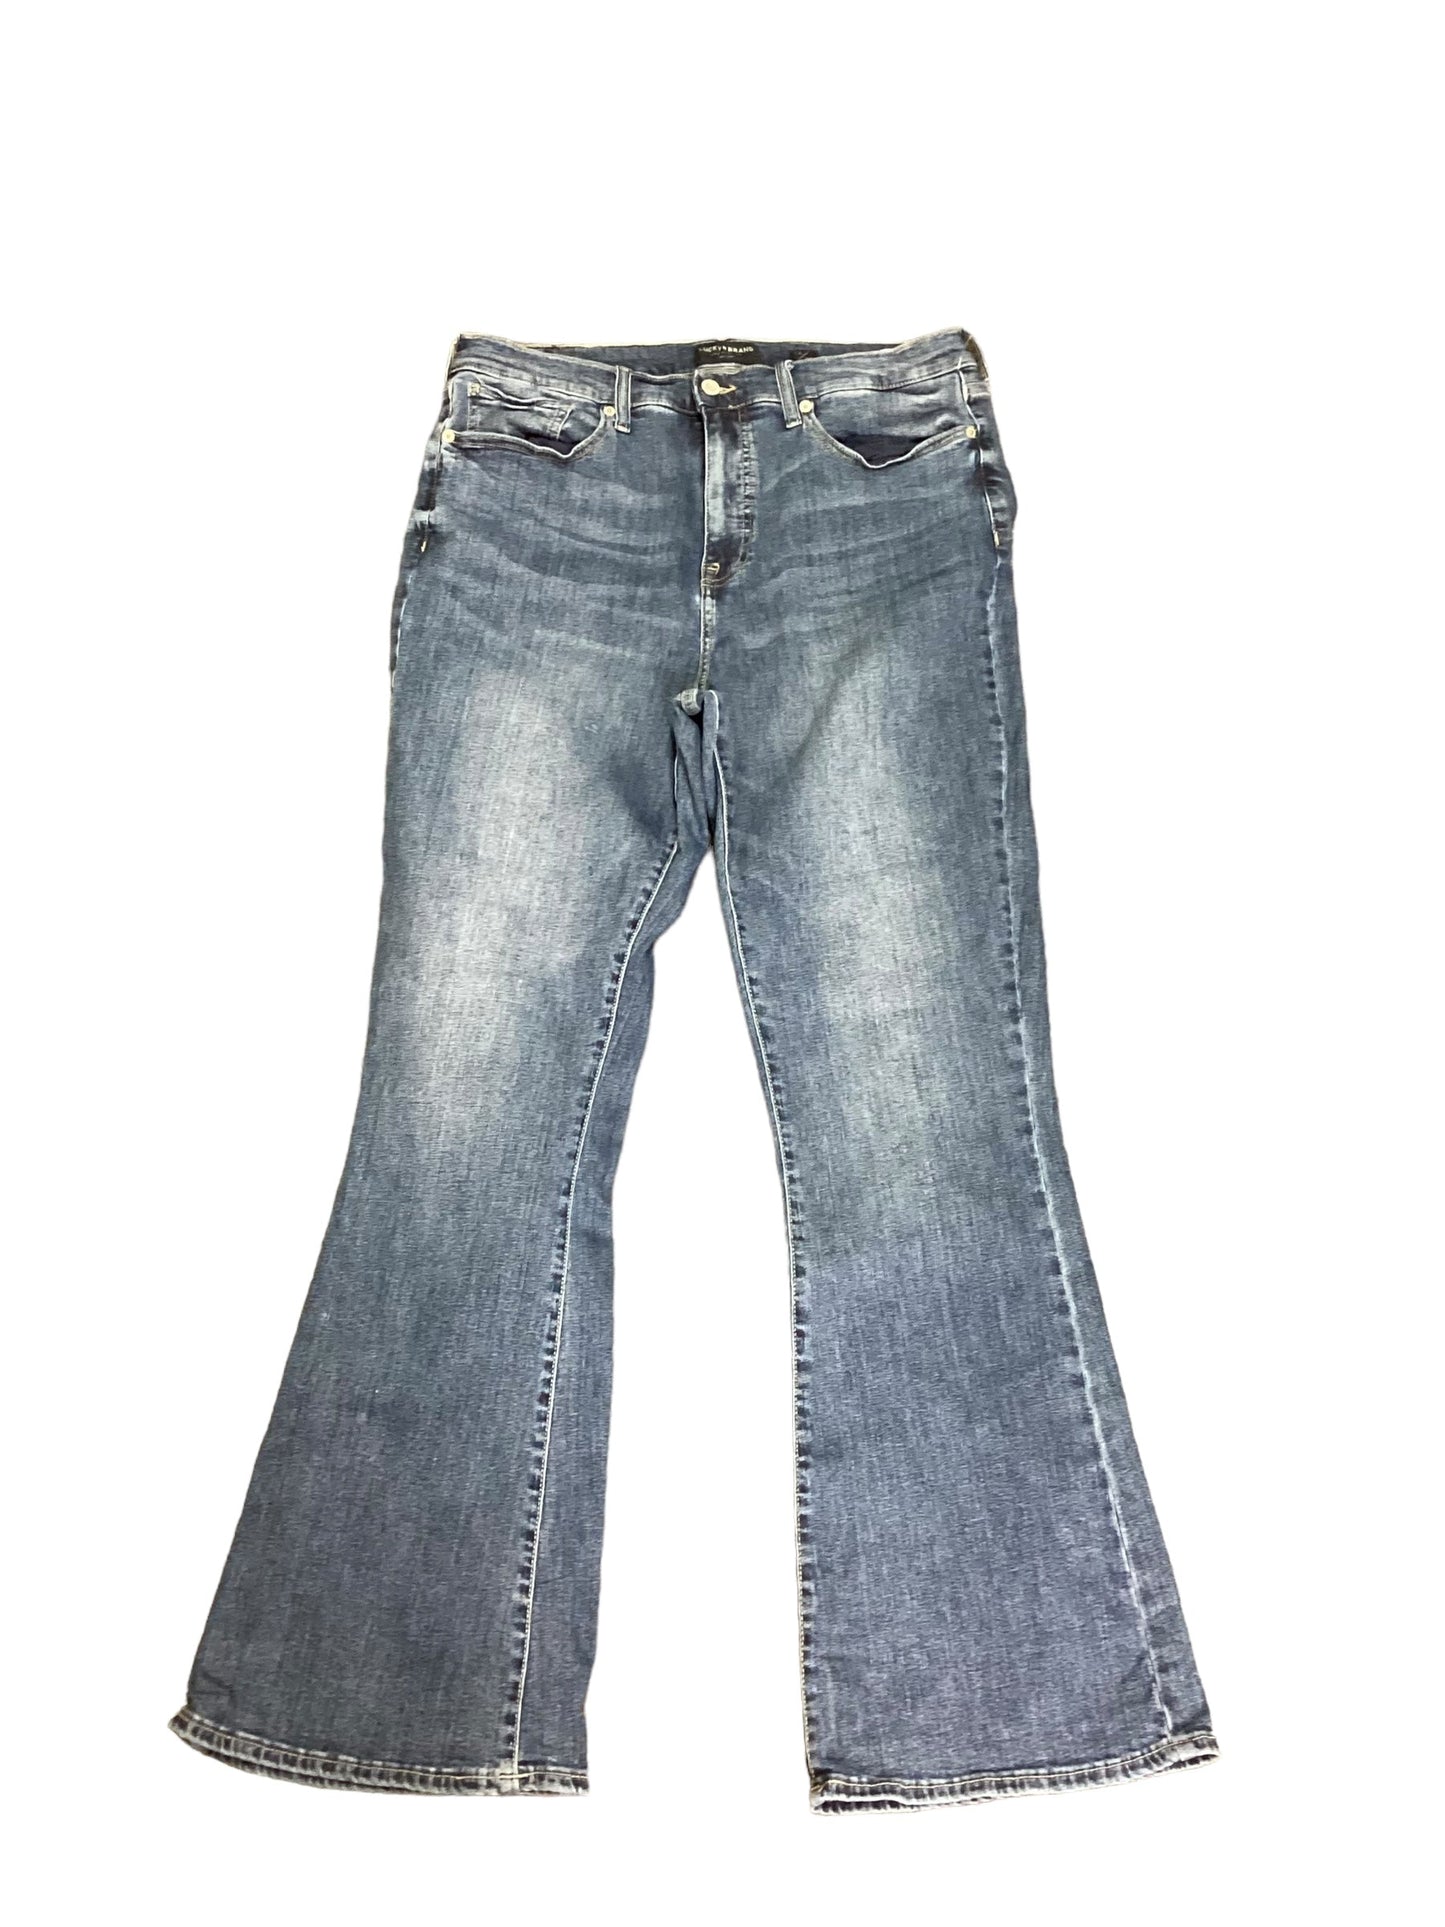 Blue Denim Jeans Flared Lucky Brand, Size 16